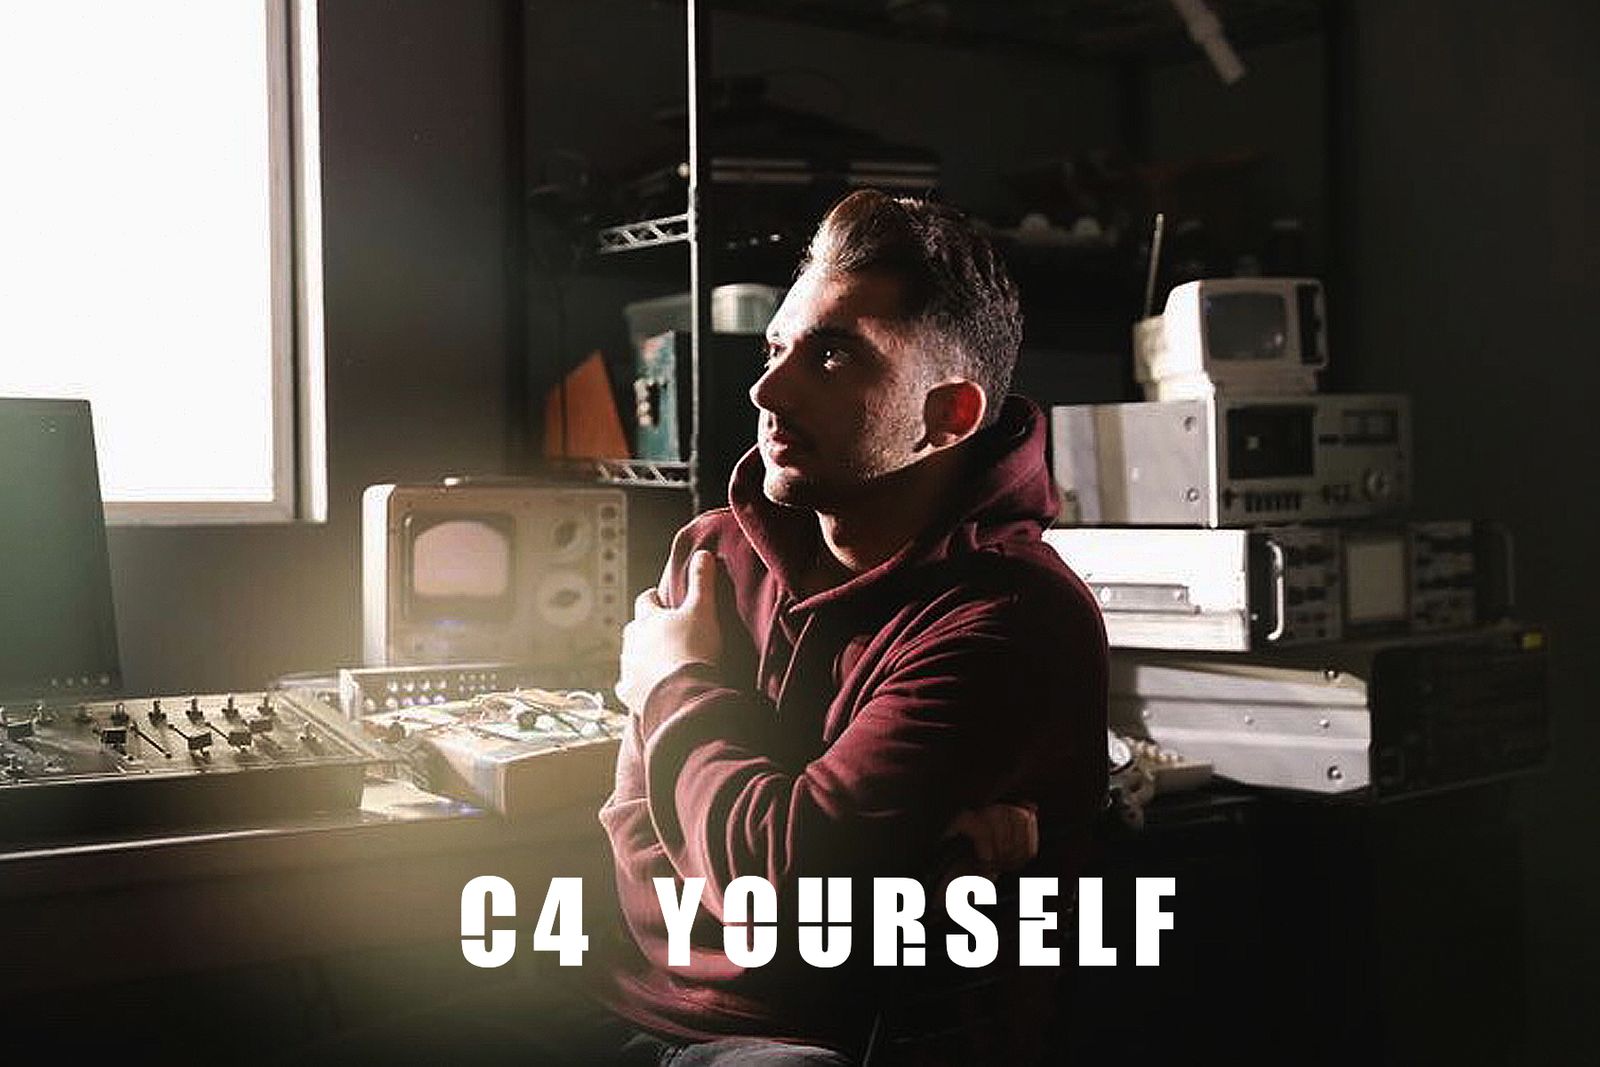 C4 Yourself